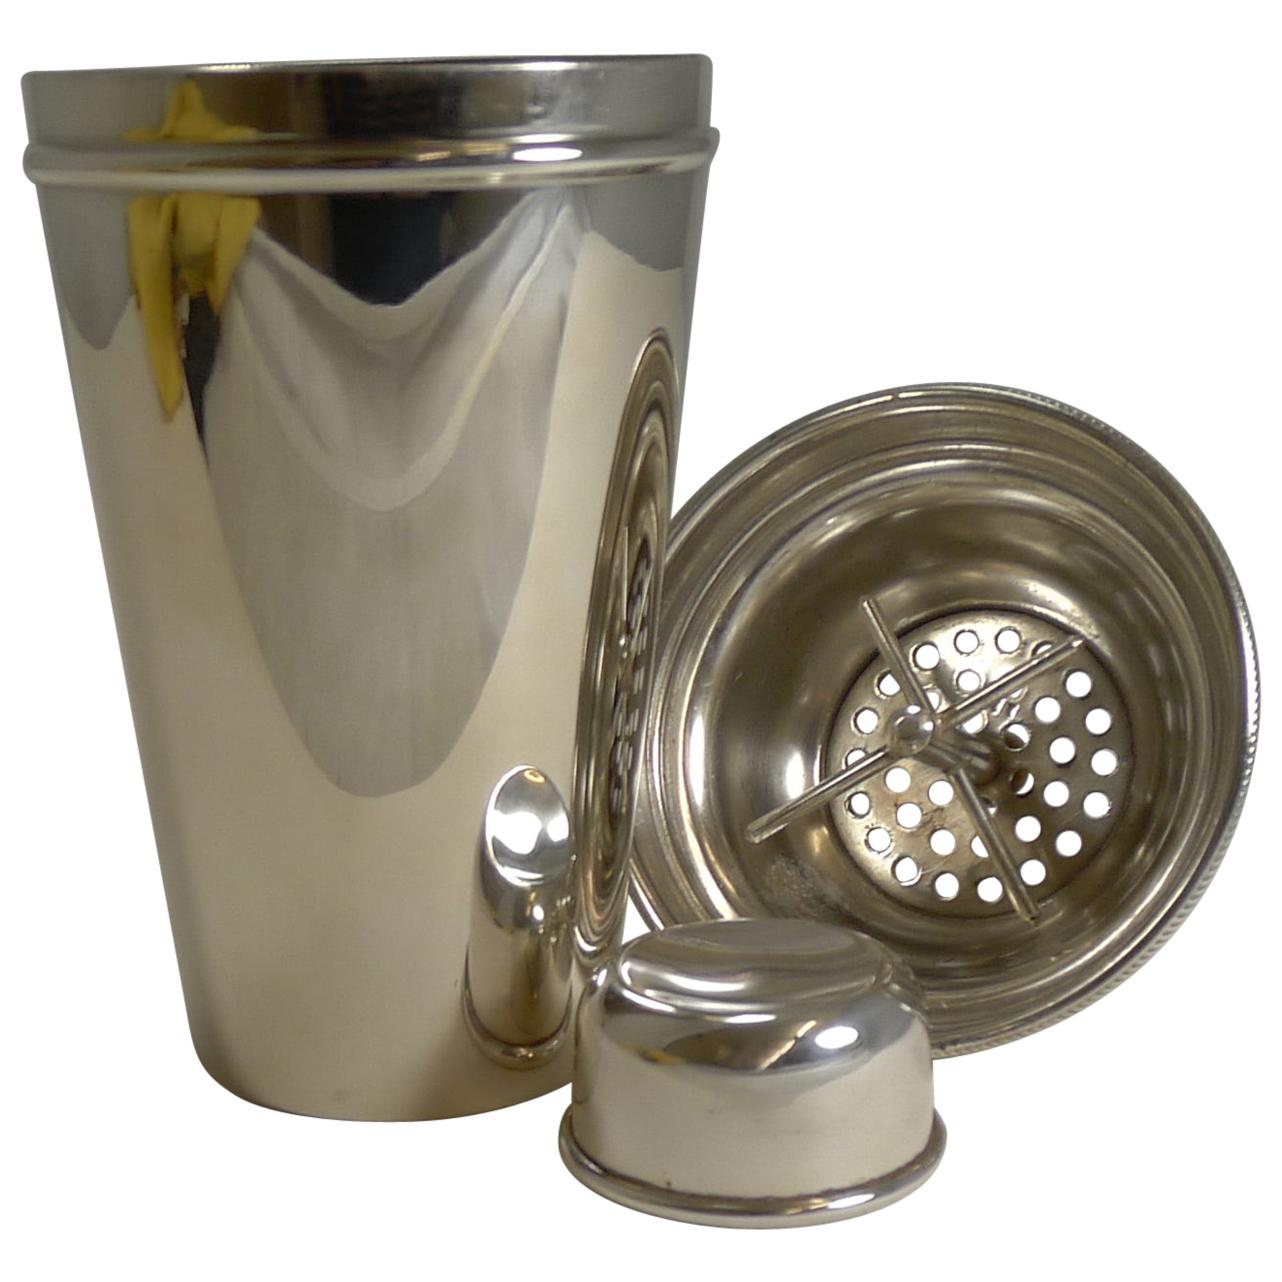 Vintage English Art Deco Silver Plated Cocktail Shaker with Integral Ice Breaker